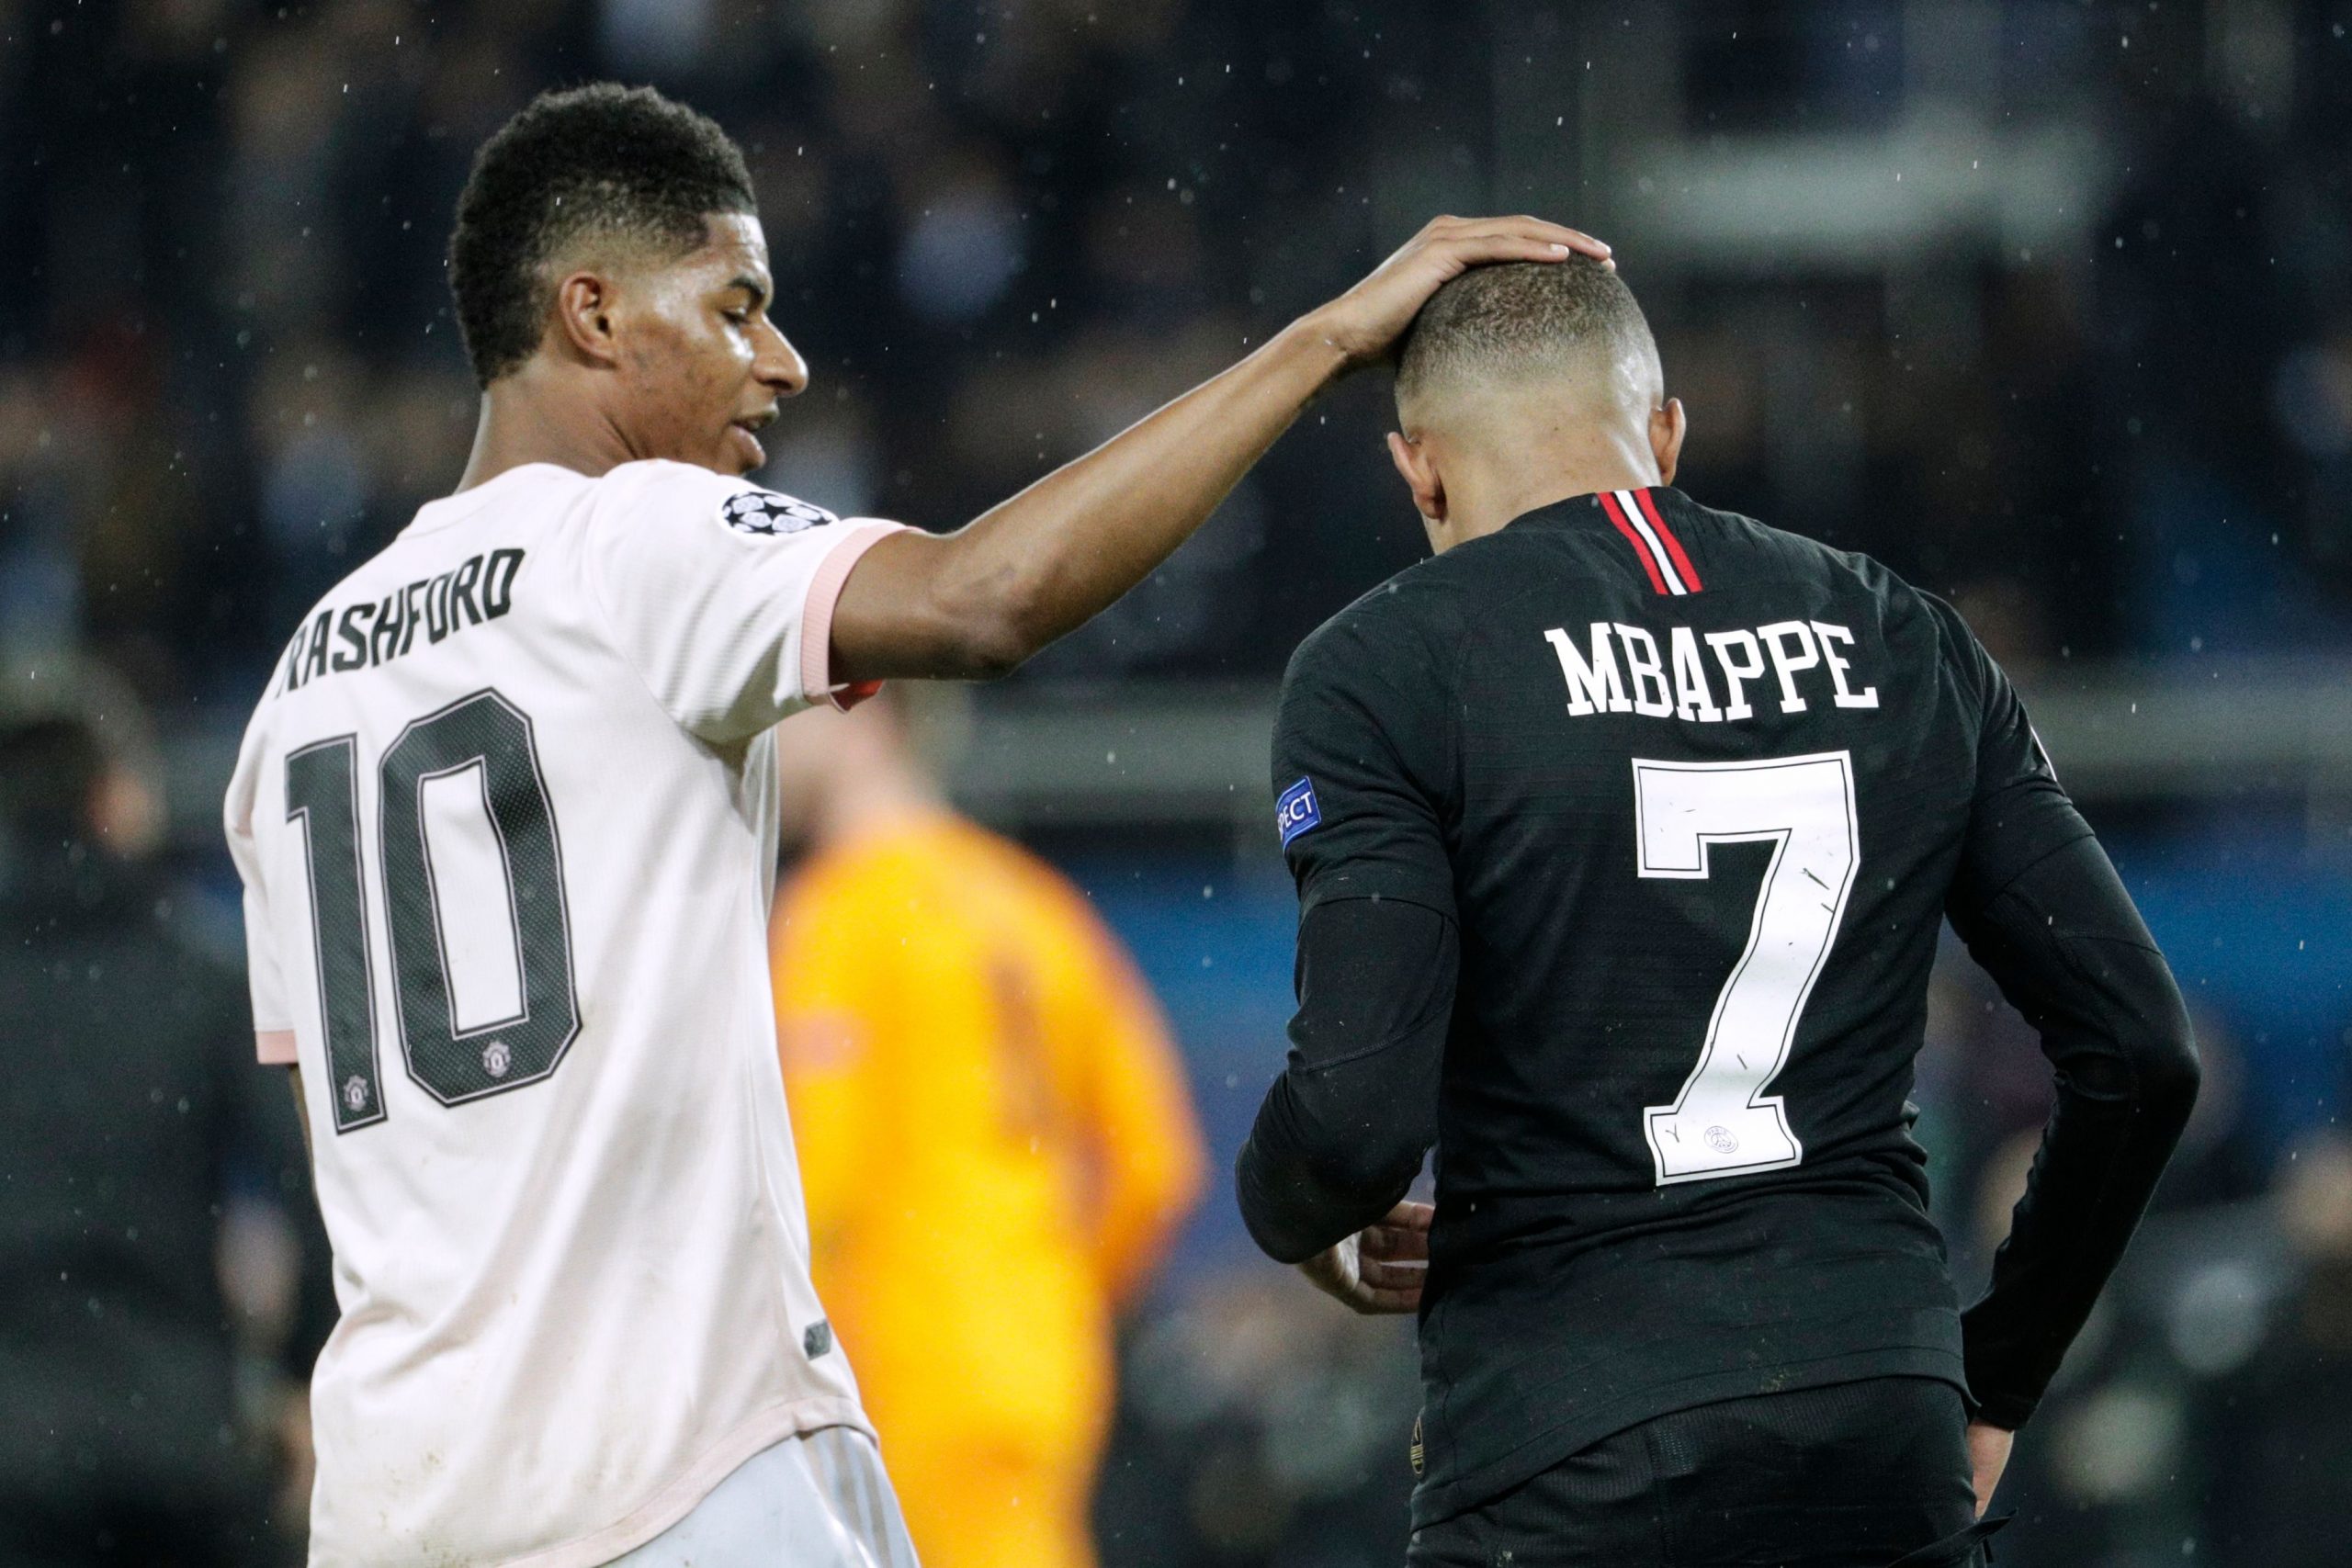 Marcus Rashford of Manchester United with Paris Saint-Germain's Kylian Mbappe during a UEFA Champions League match.